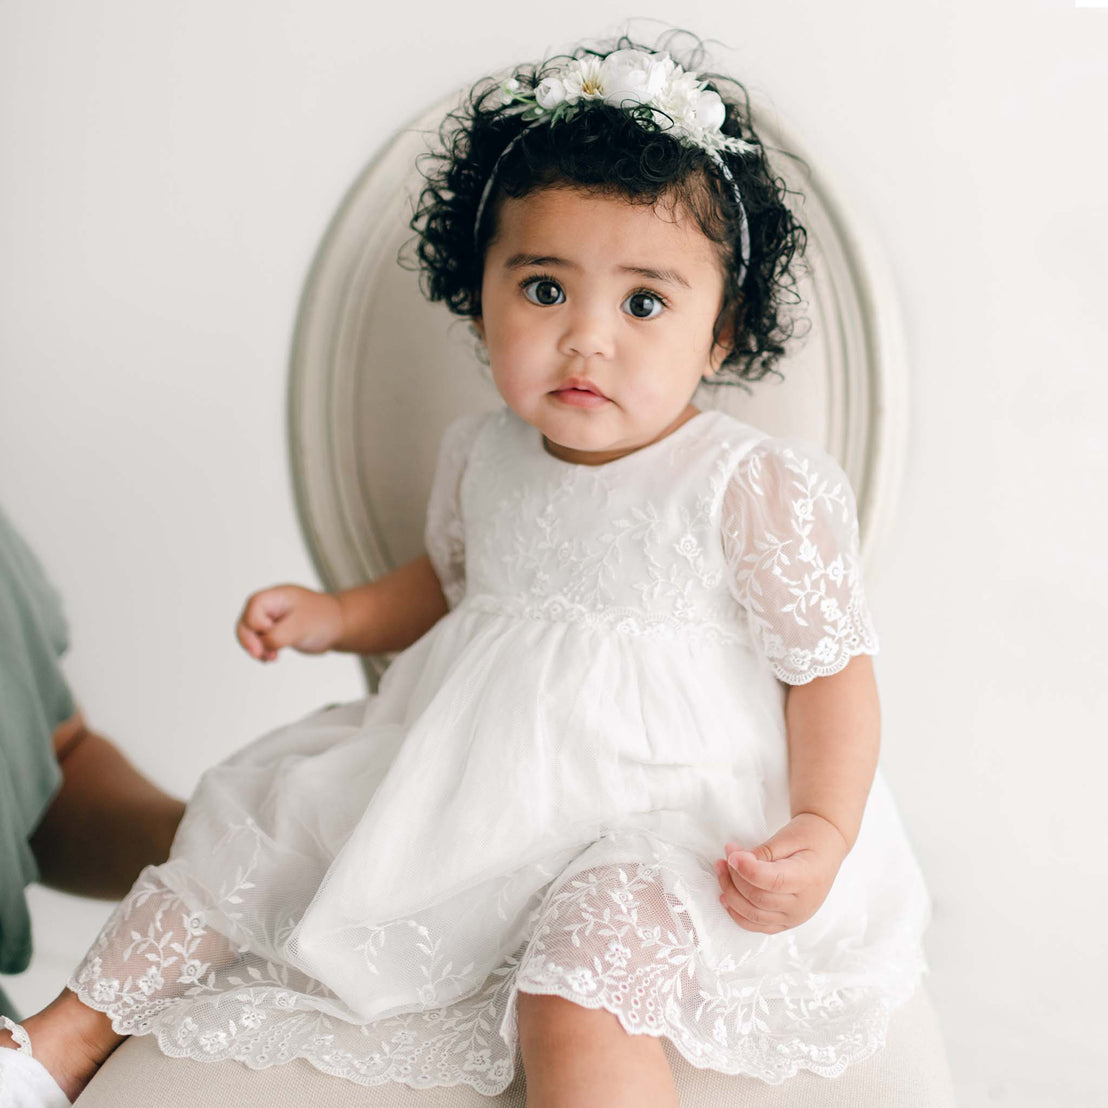 A baby girl with curly hair and big eyes, wearing a white Poppy Fields romper dress with floral embroidered netting lace, sits on a vintage chair against a white backdrop.